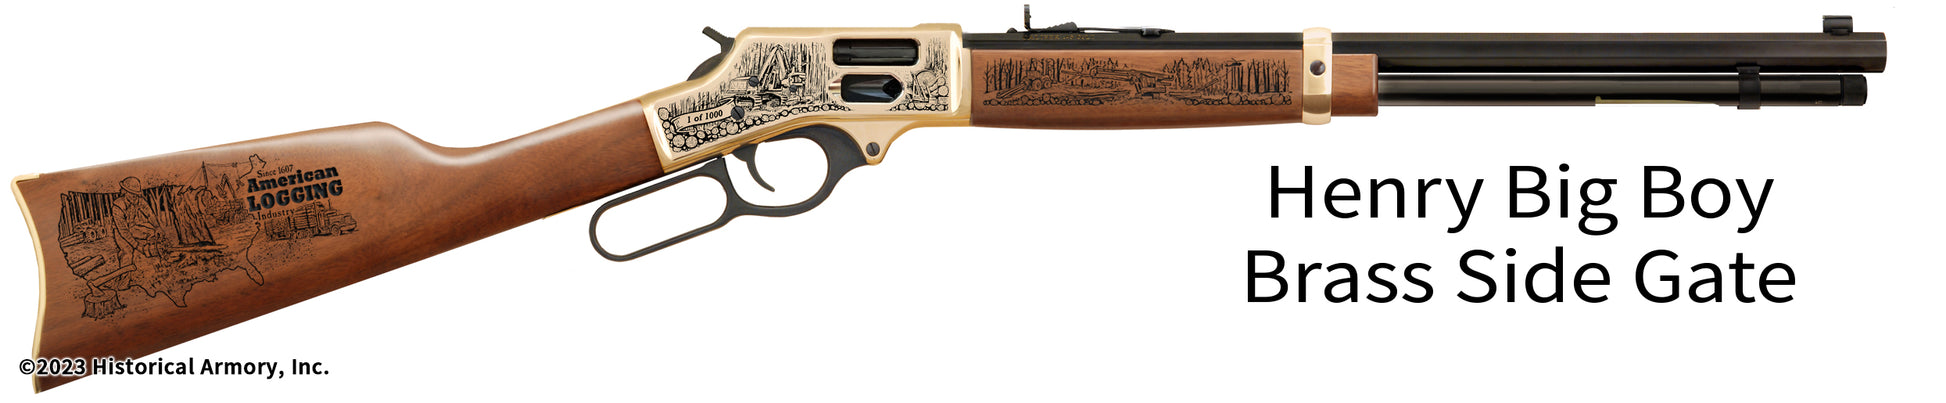 American Logging Industry Limited Edition Engraved Henry Big Boy Rifle